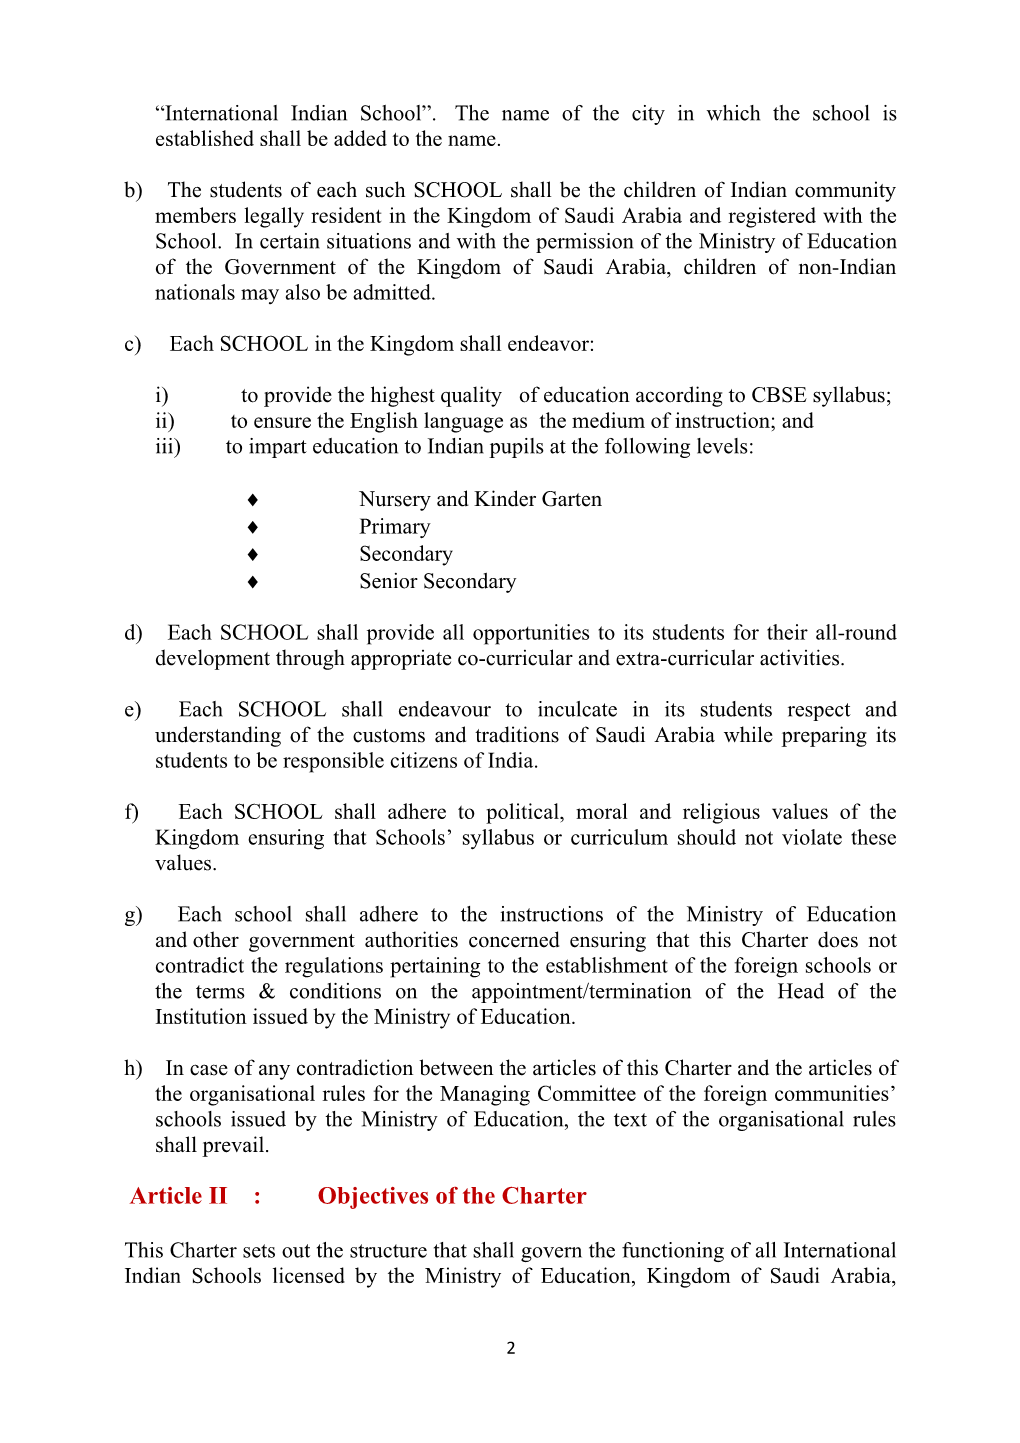 Charter of International Indian Schools Under the Supervision of the Ministry of Education